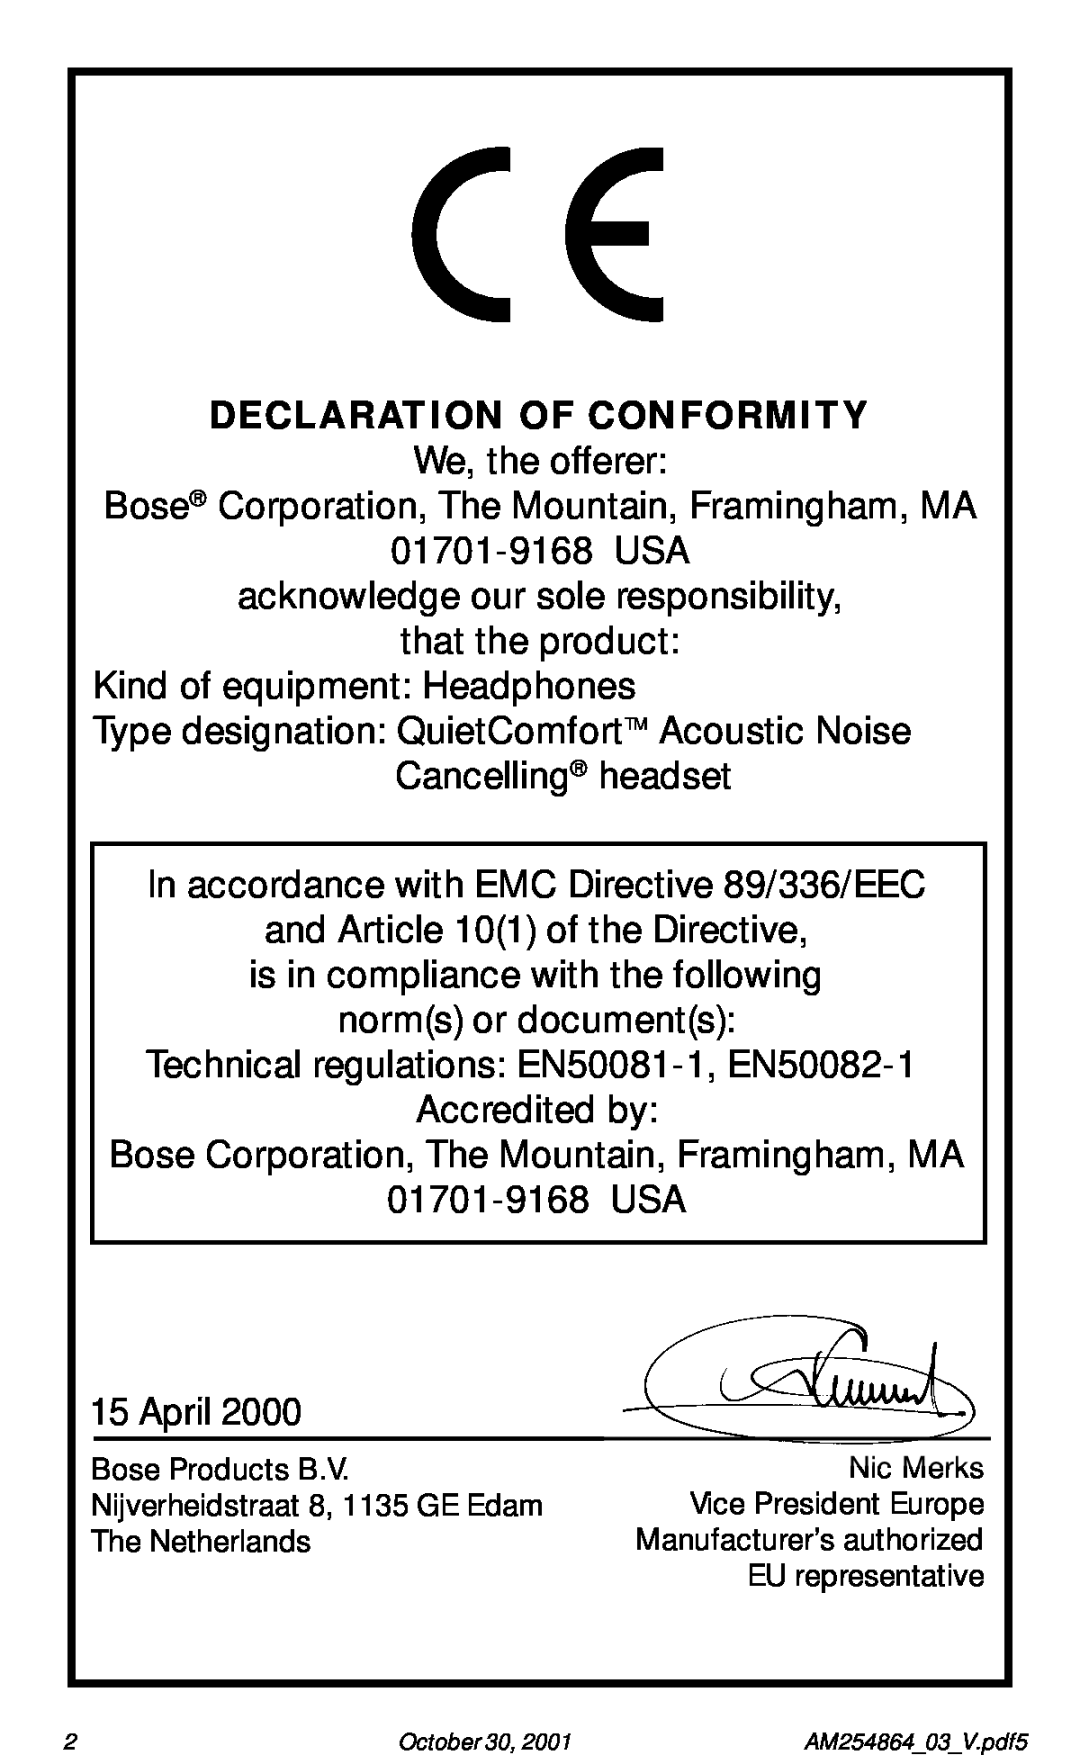 Bose Acoustic Noise Cancelling Headset manual Declaration Of Conformity 